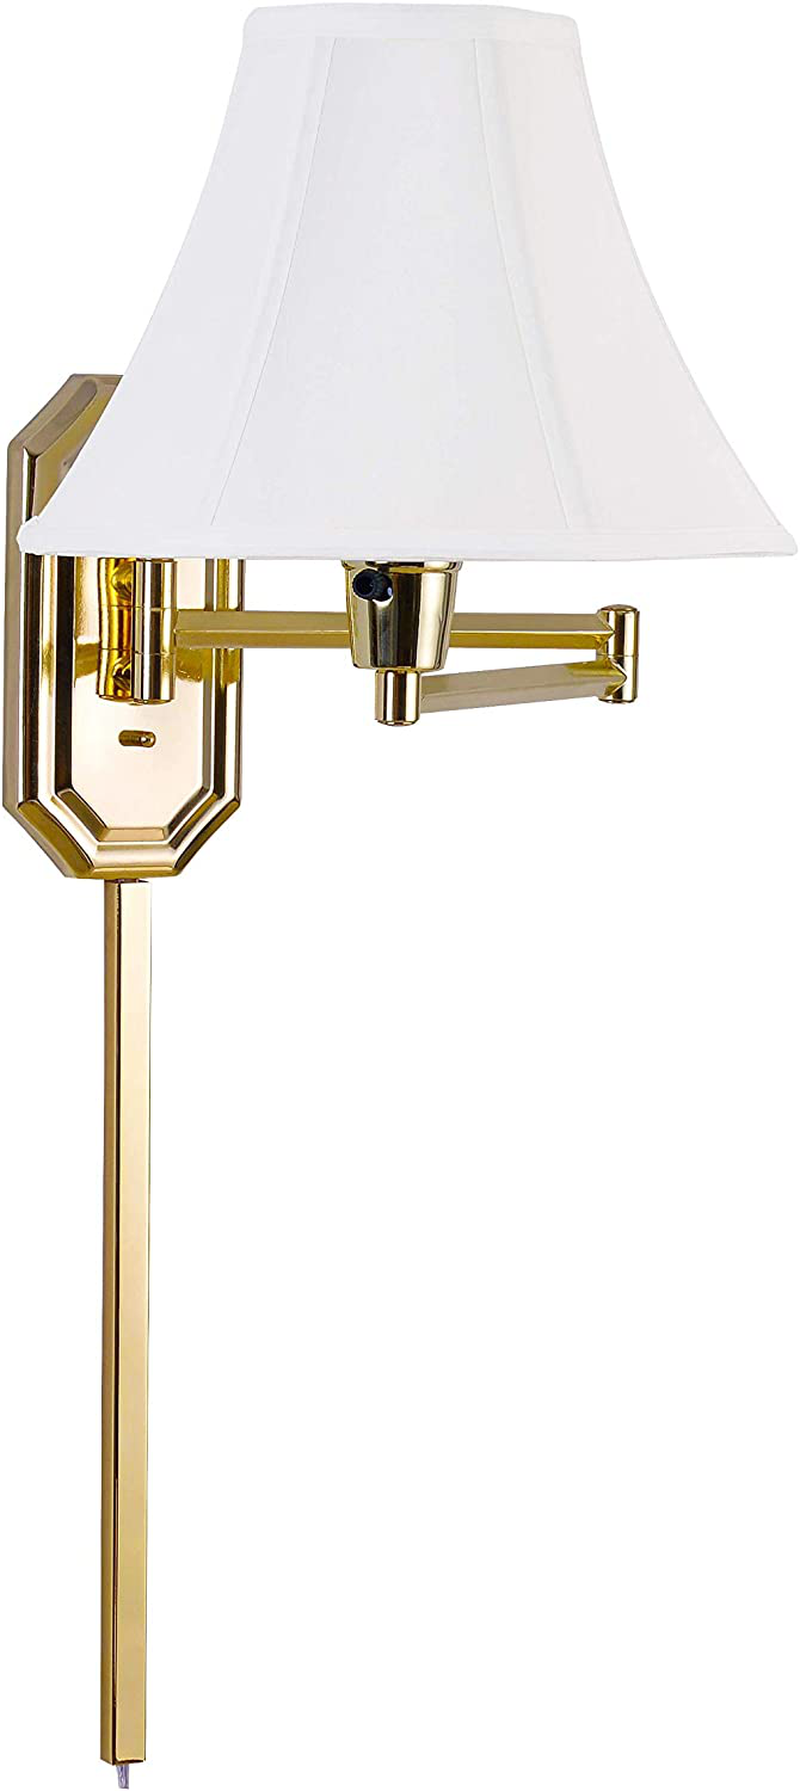 Kenroy Home 30130PB Nathaniel Wall Swing Arm Lamp, 15 Inch Height, 15 Inch Width, 24 Inch Extension, Polished Brass